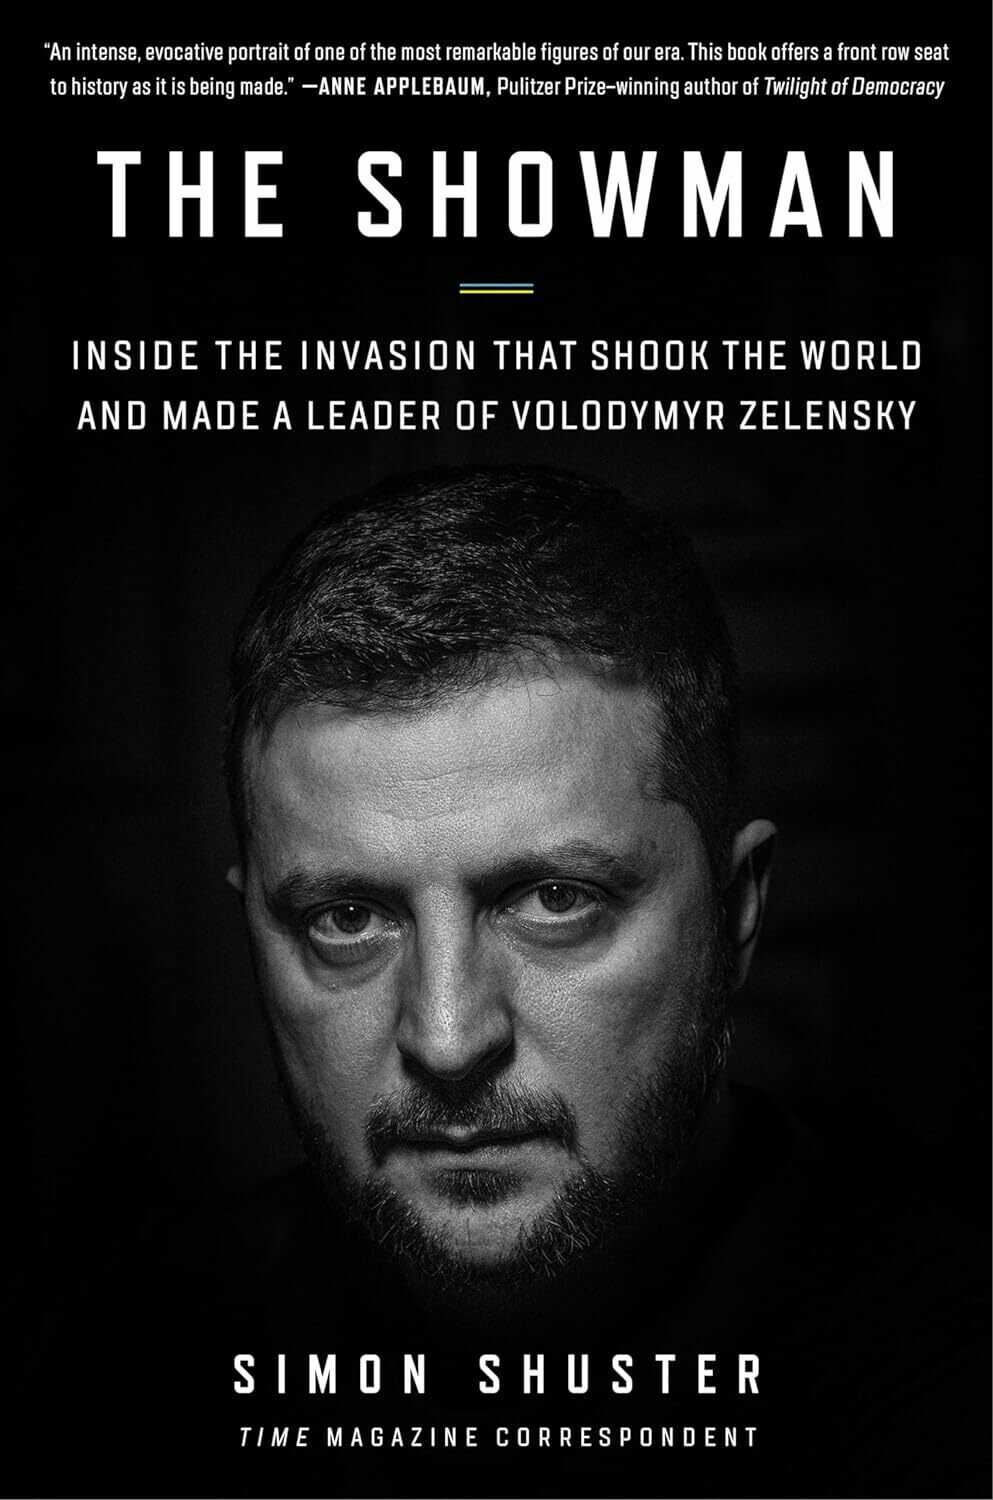 The black-and-white cover of 'The Showman' features a portrait of Ukrainian President Volodymyr Zelensky looking at the camera. 